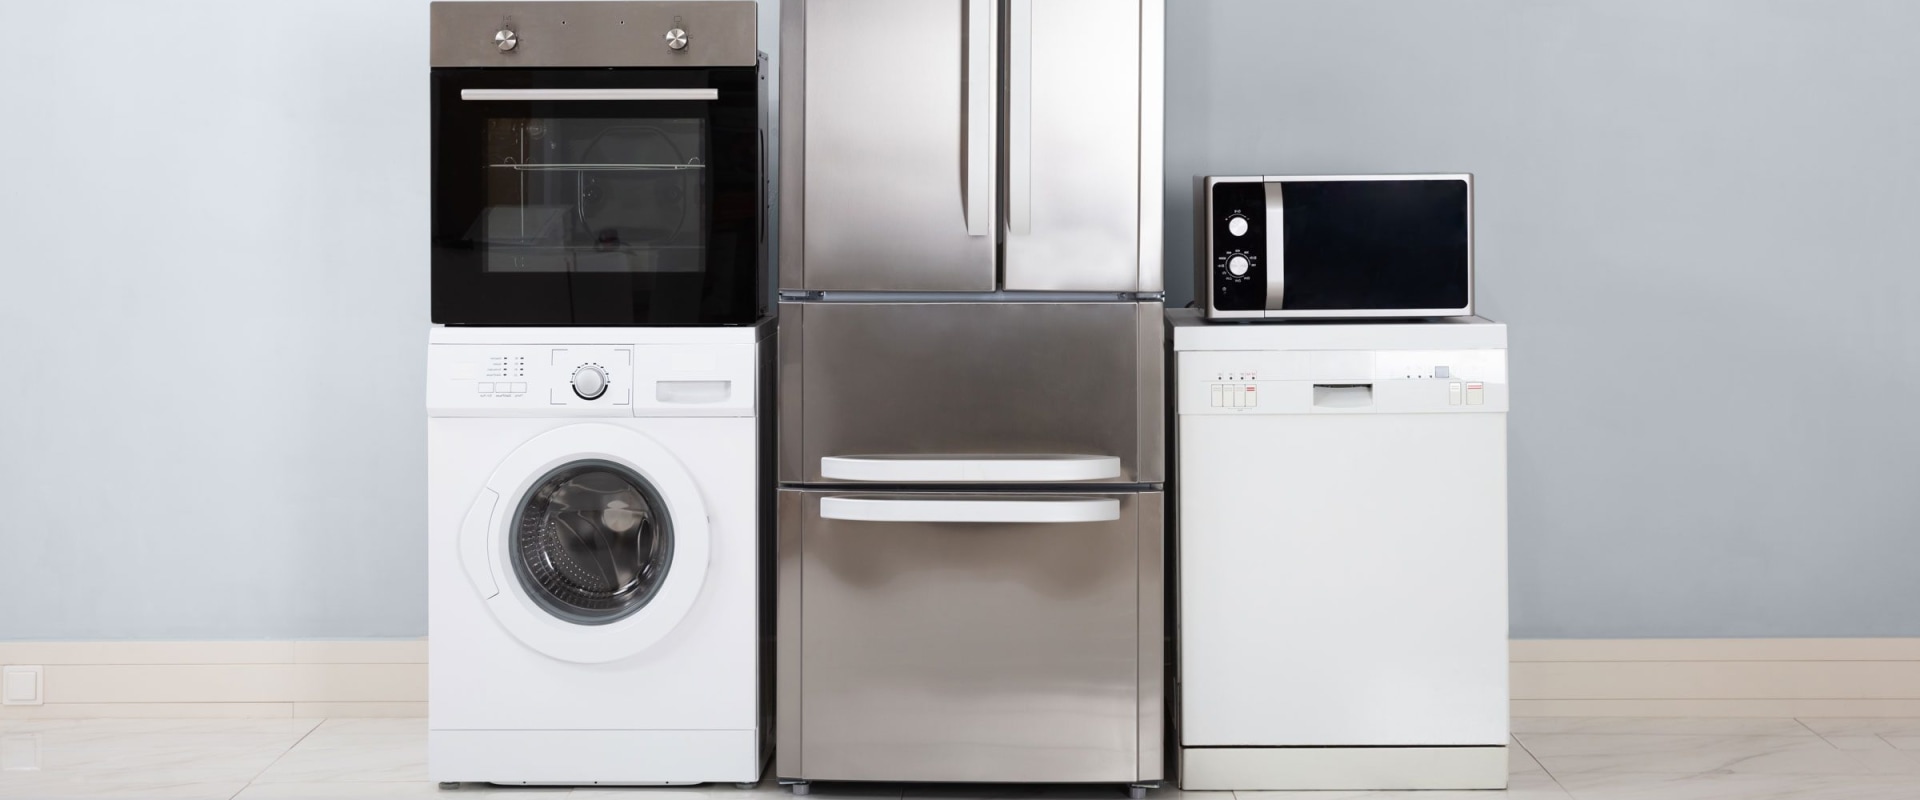 What is the most commonly used kitchen appliance?